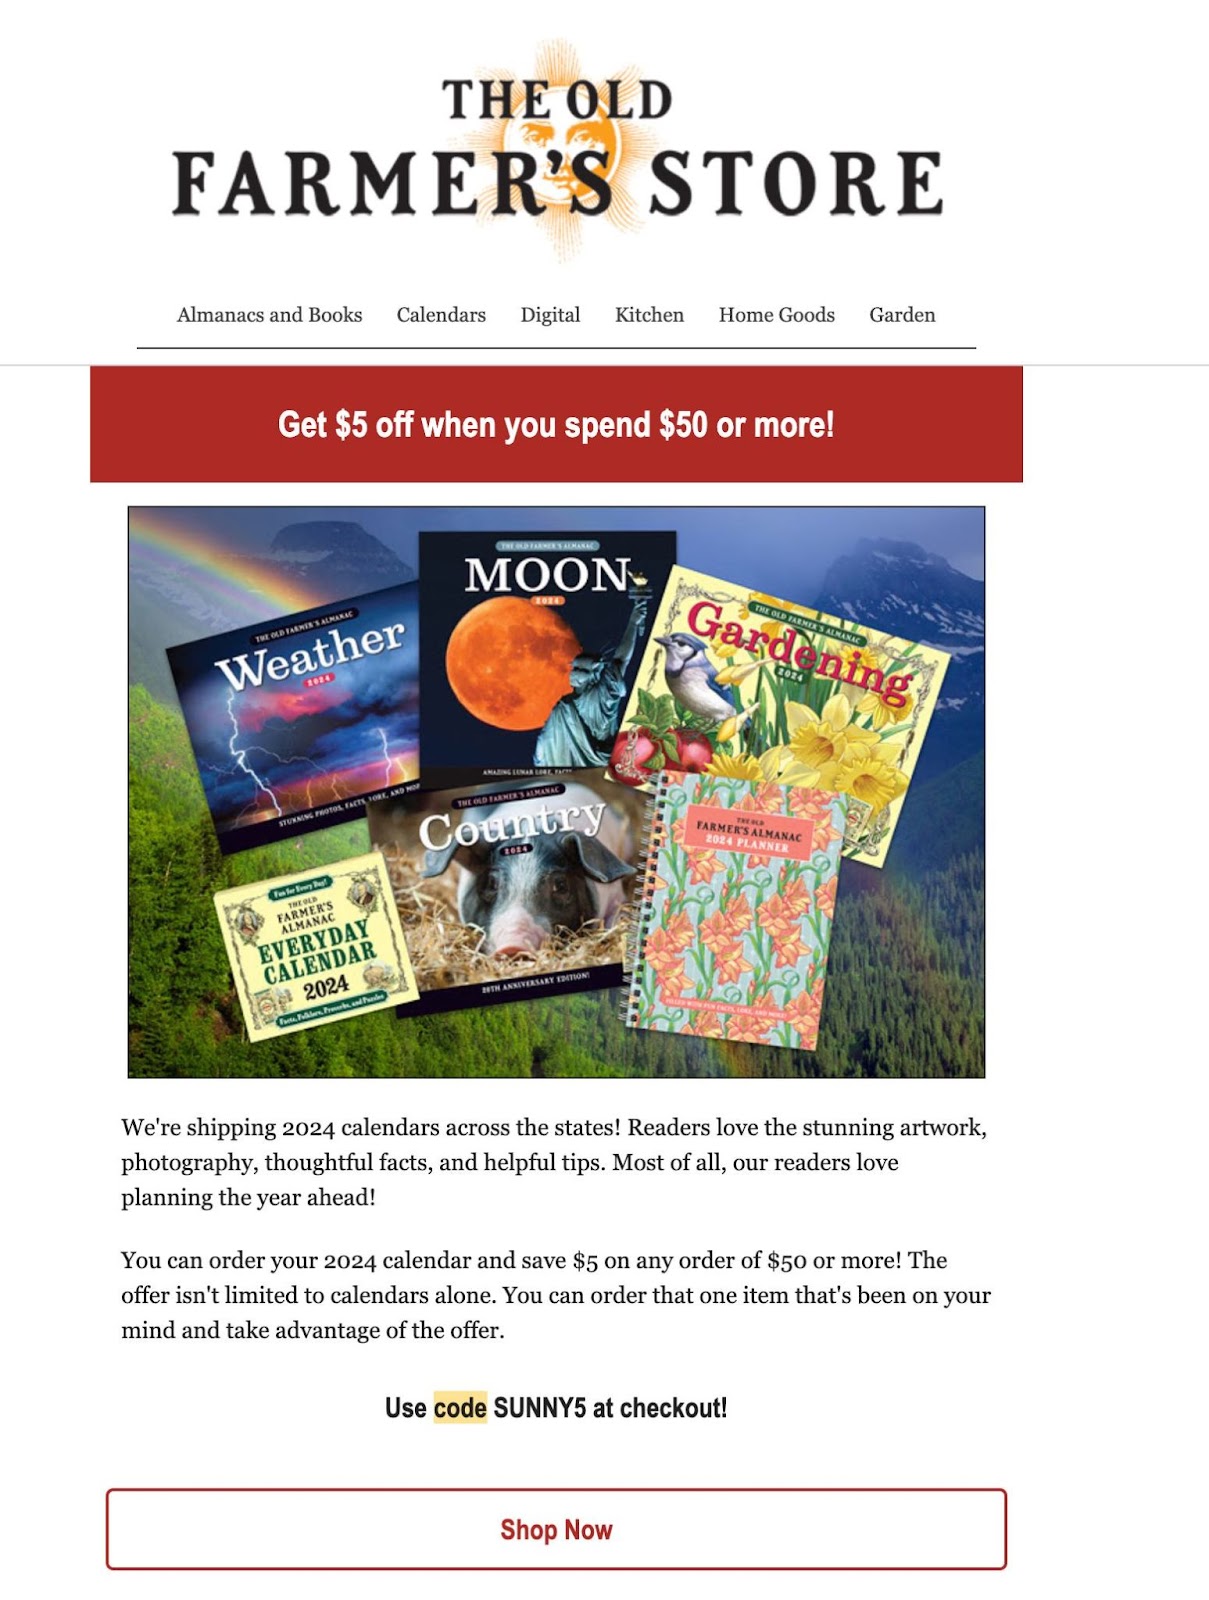 A promotional email from "The Old Farmer's Store"